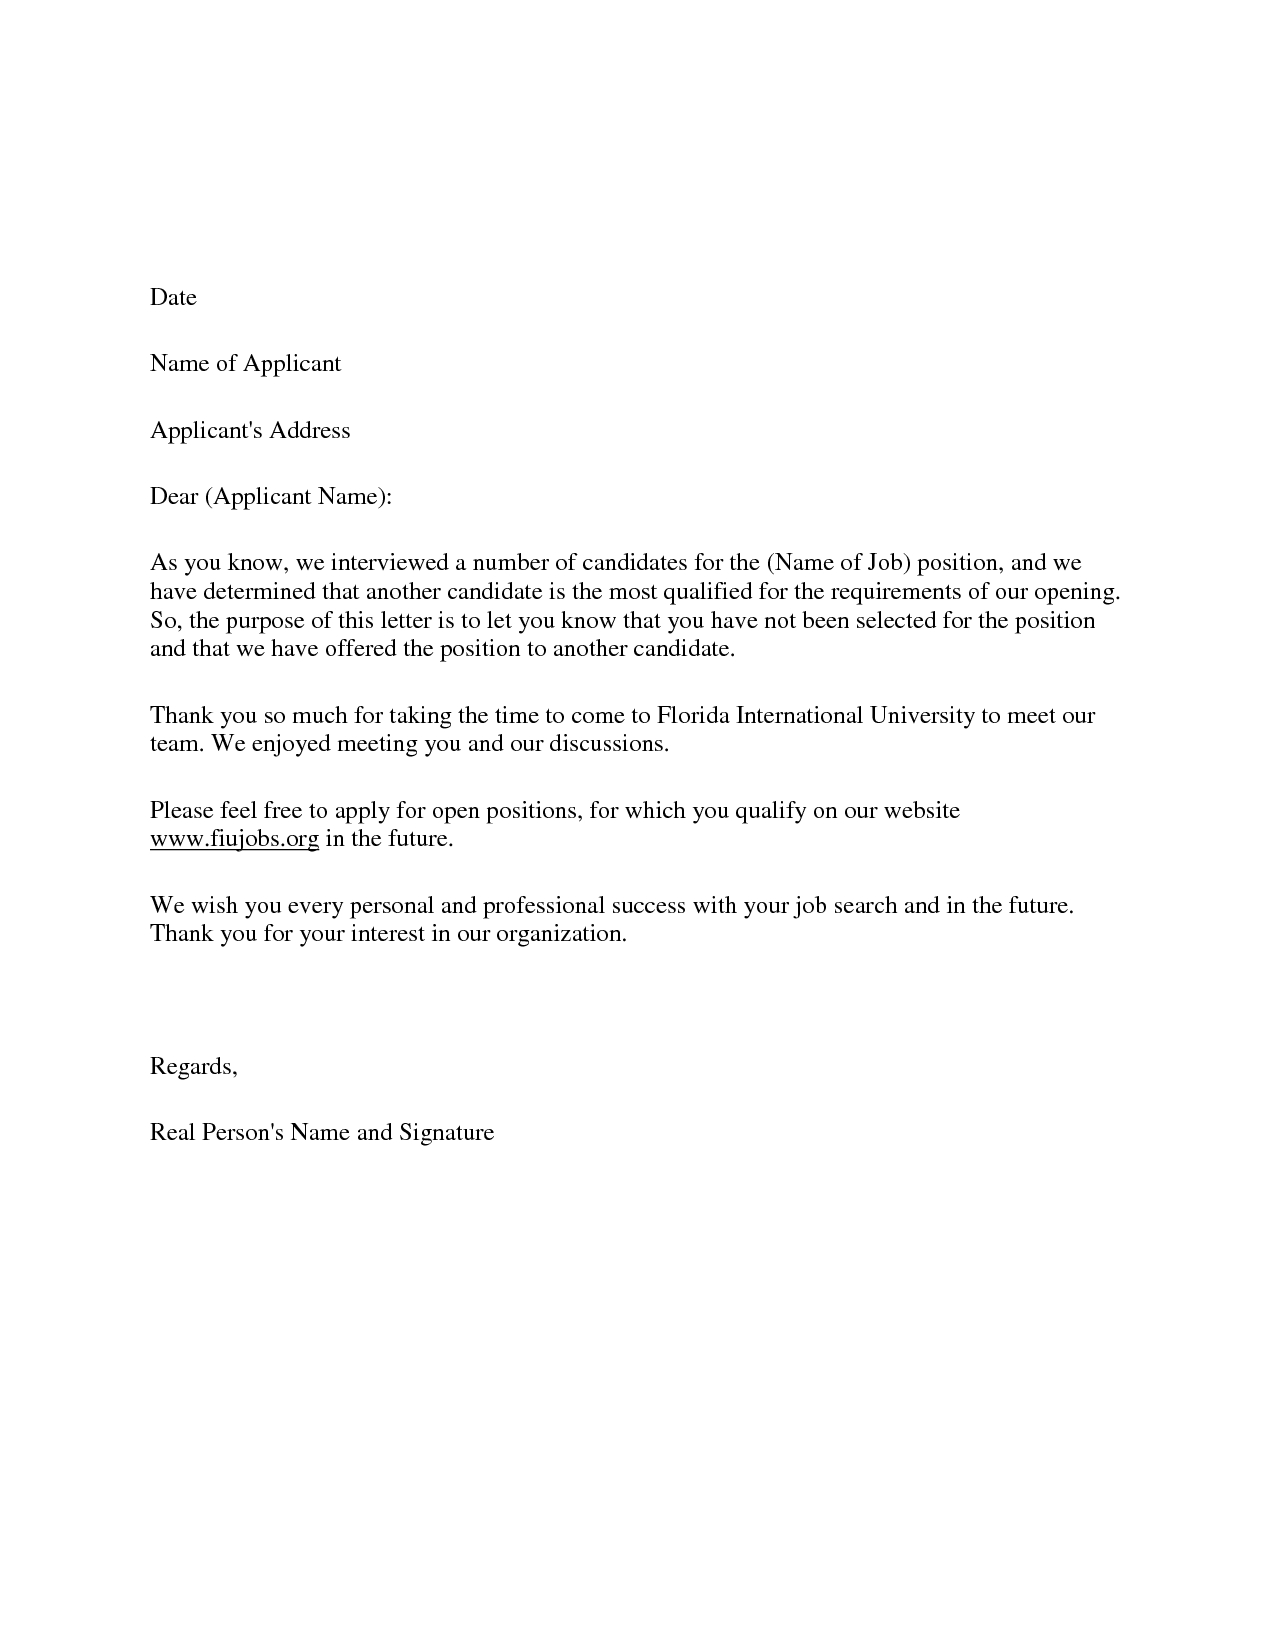 Job Offer Decline Letter Template - Candidate Decline Letter Employers Of Choice Send Rejection